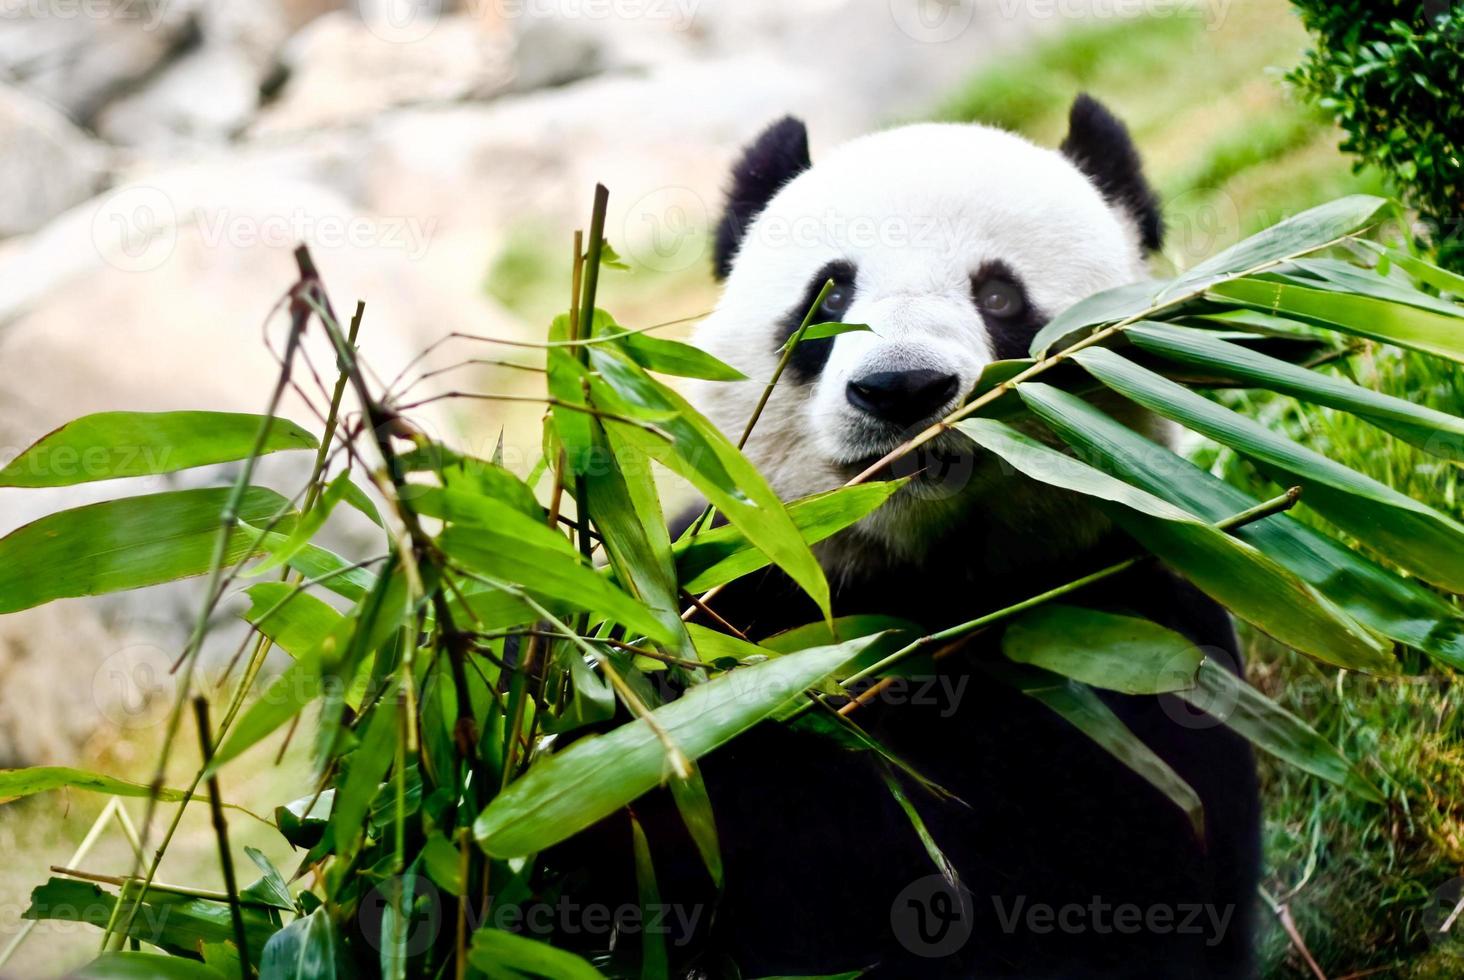 The giant panda is eating bamboo 839501 Stock Photo at Vecteezy